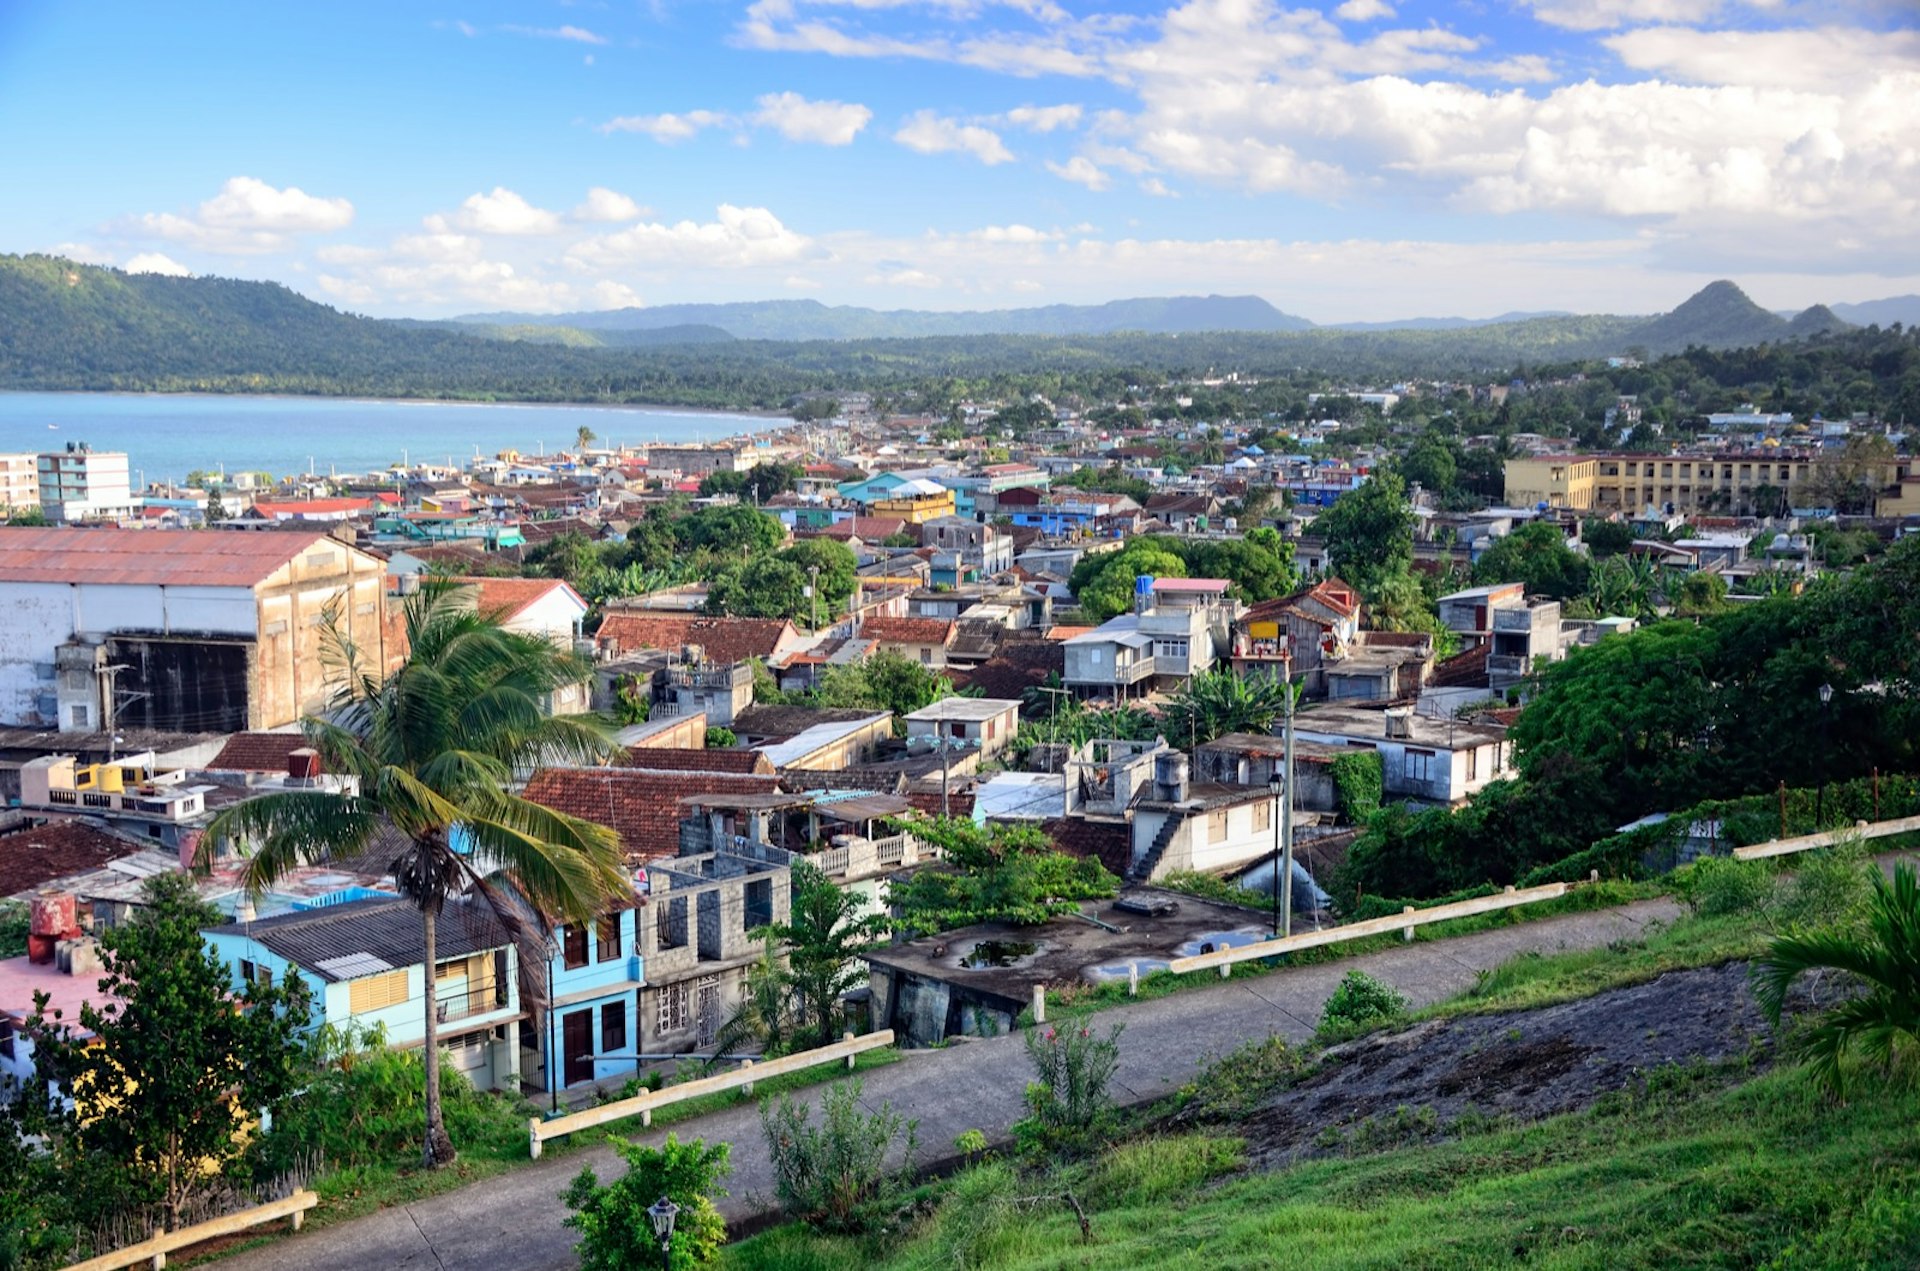 An aerial view of the town of Baracoa in Cuba. The Caribbean town is filled with red-roof buildings and palm trees. You can also see the winding paved road. 